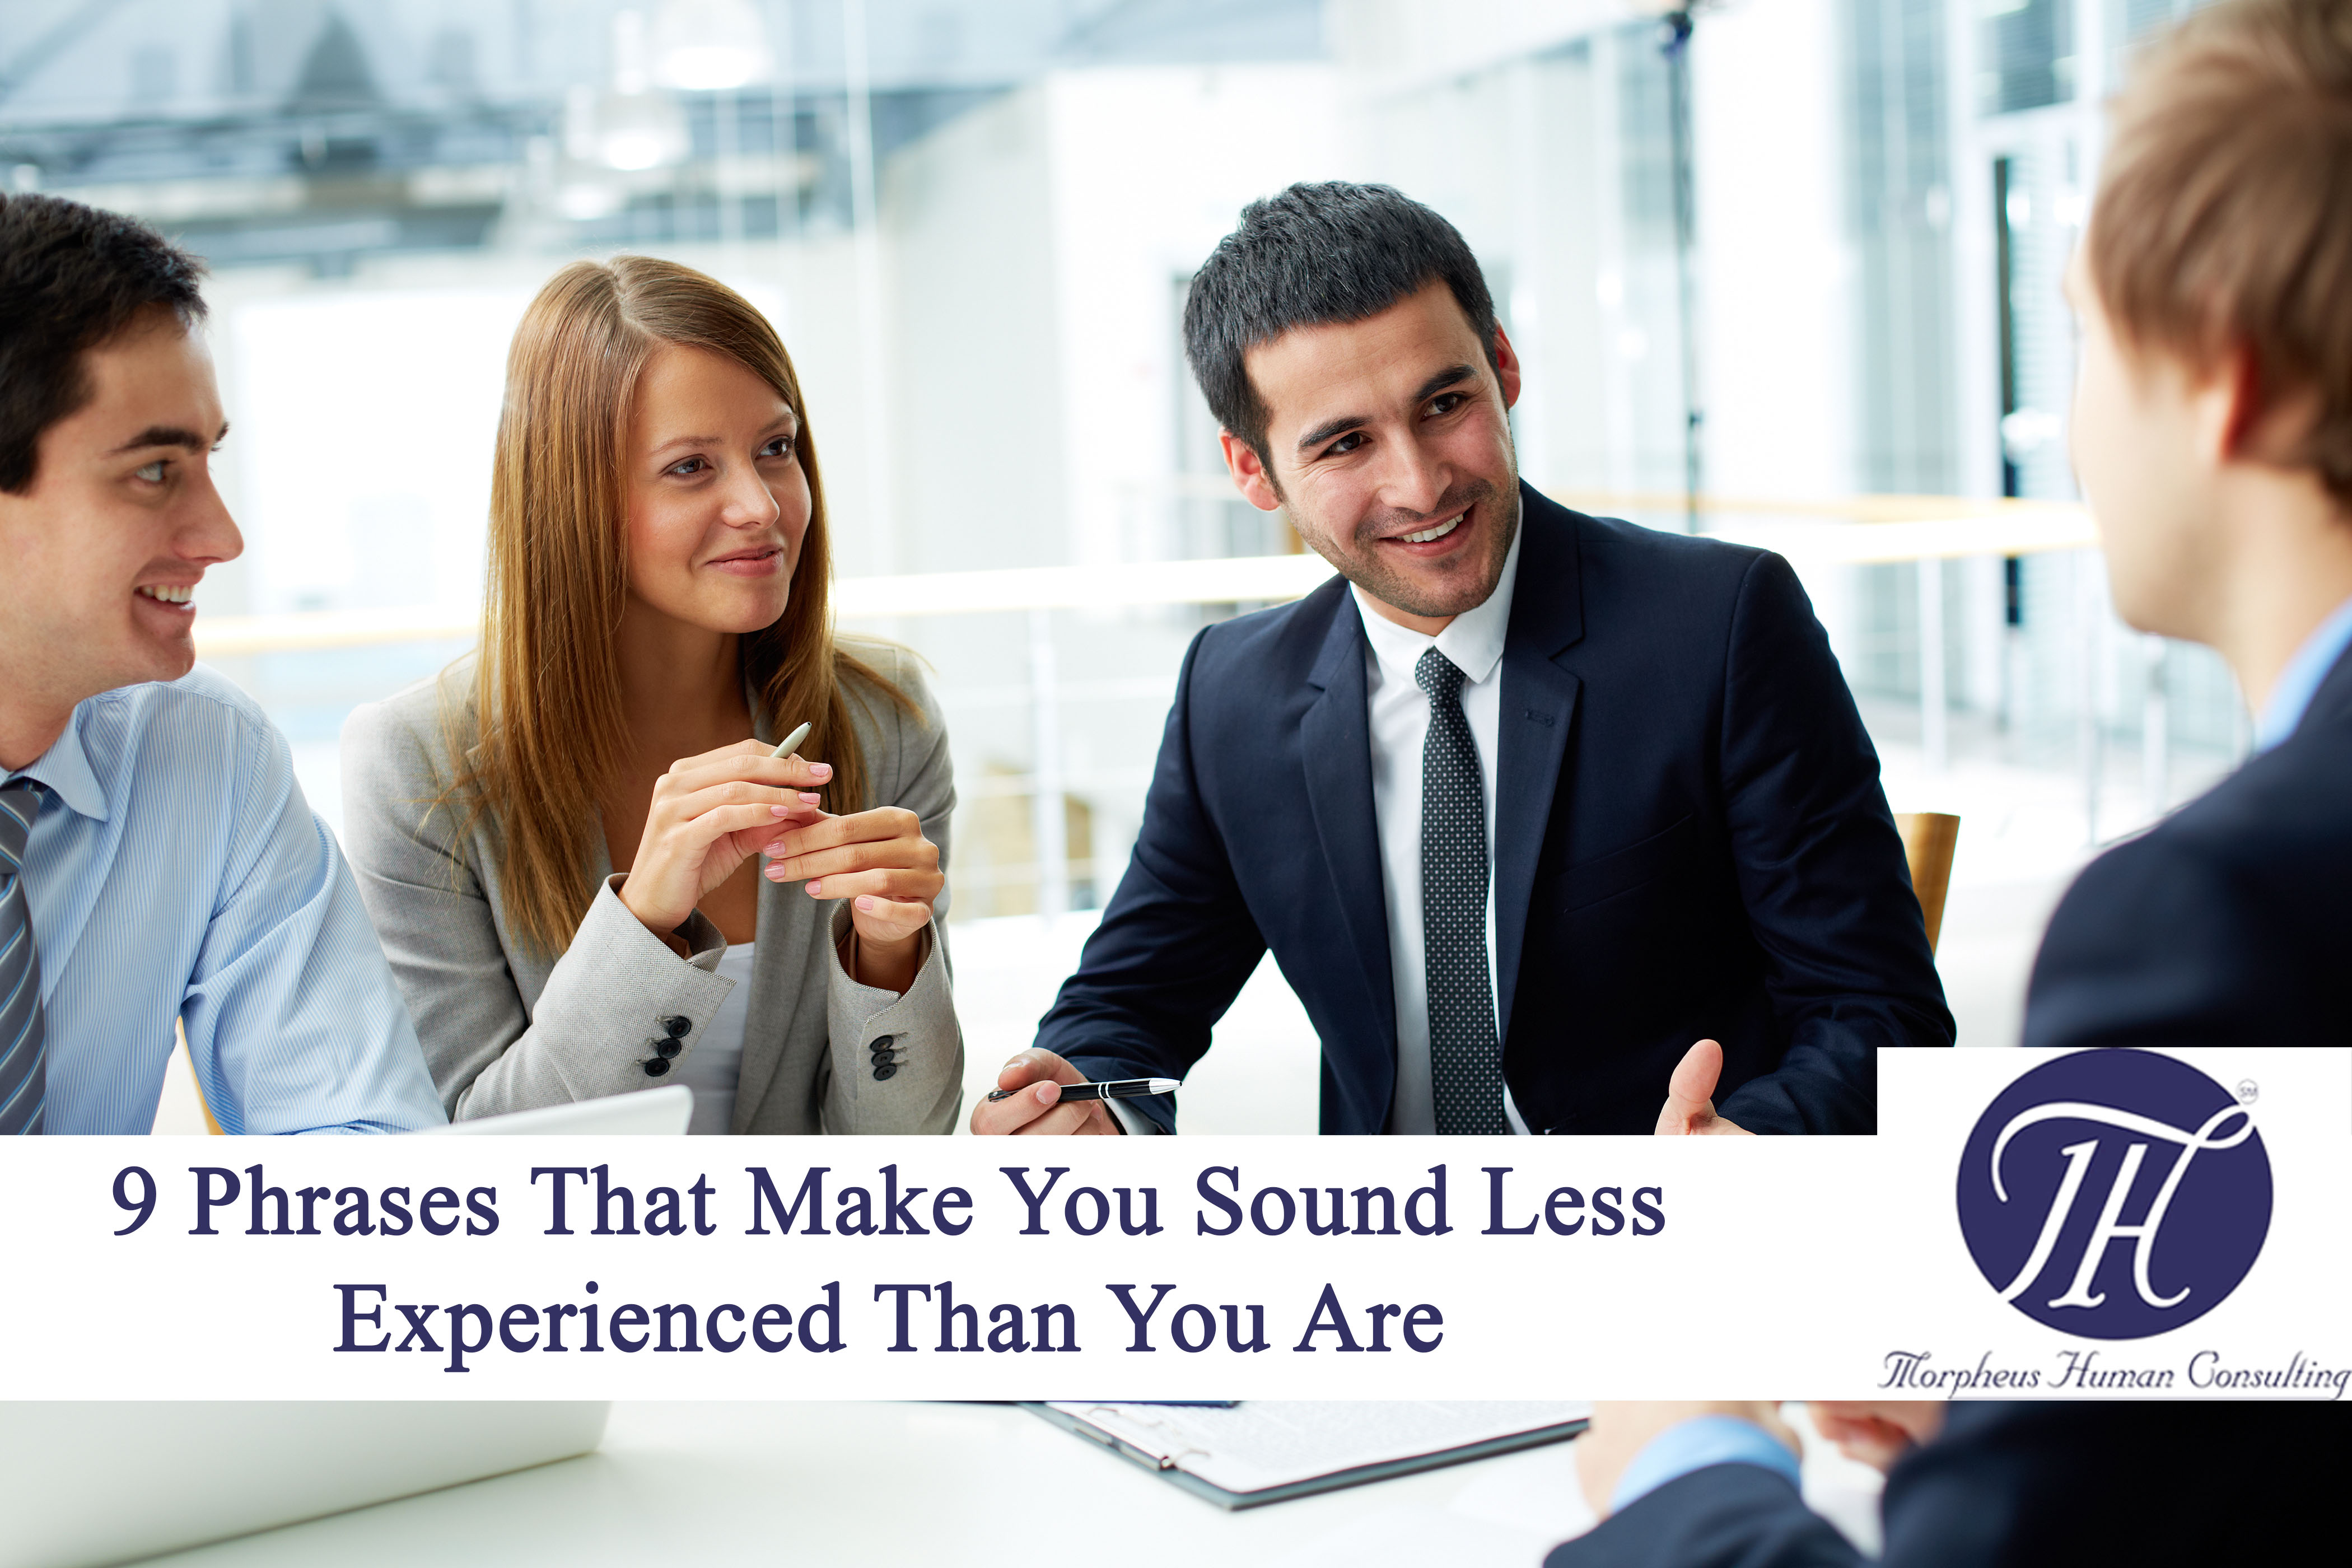 9 Phrases That Make You Sound Less Experienced Than You Are